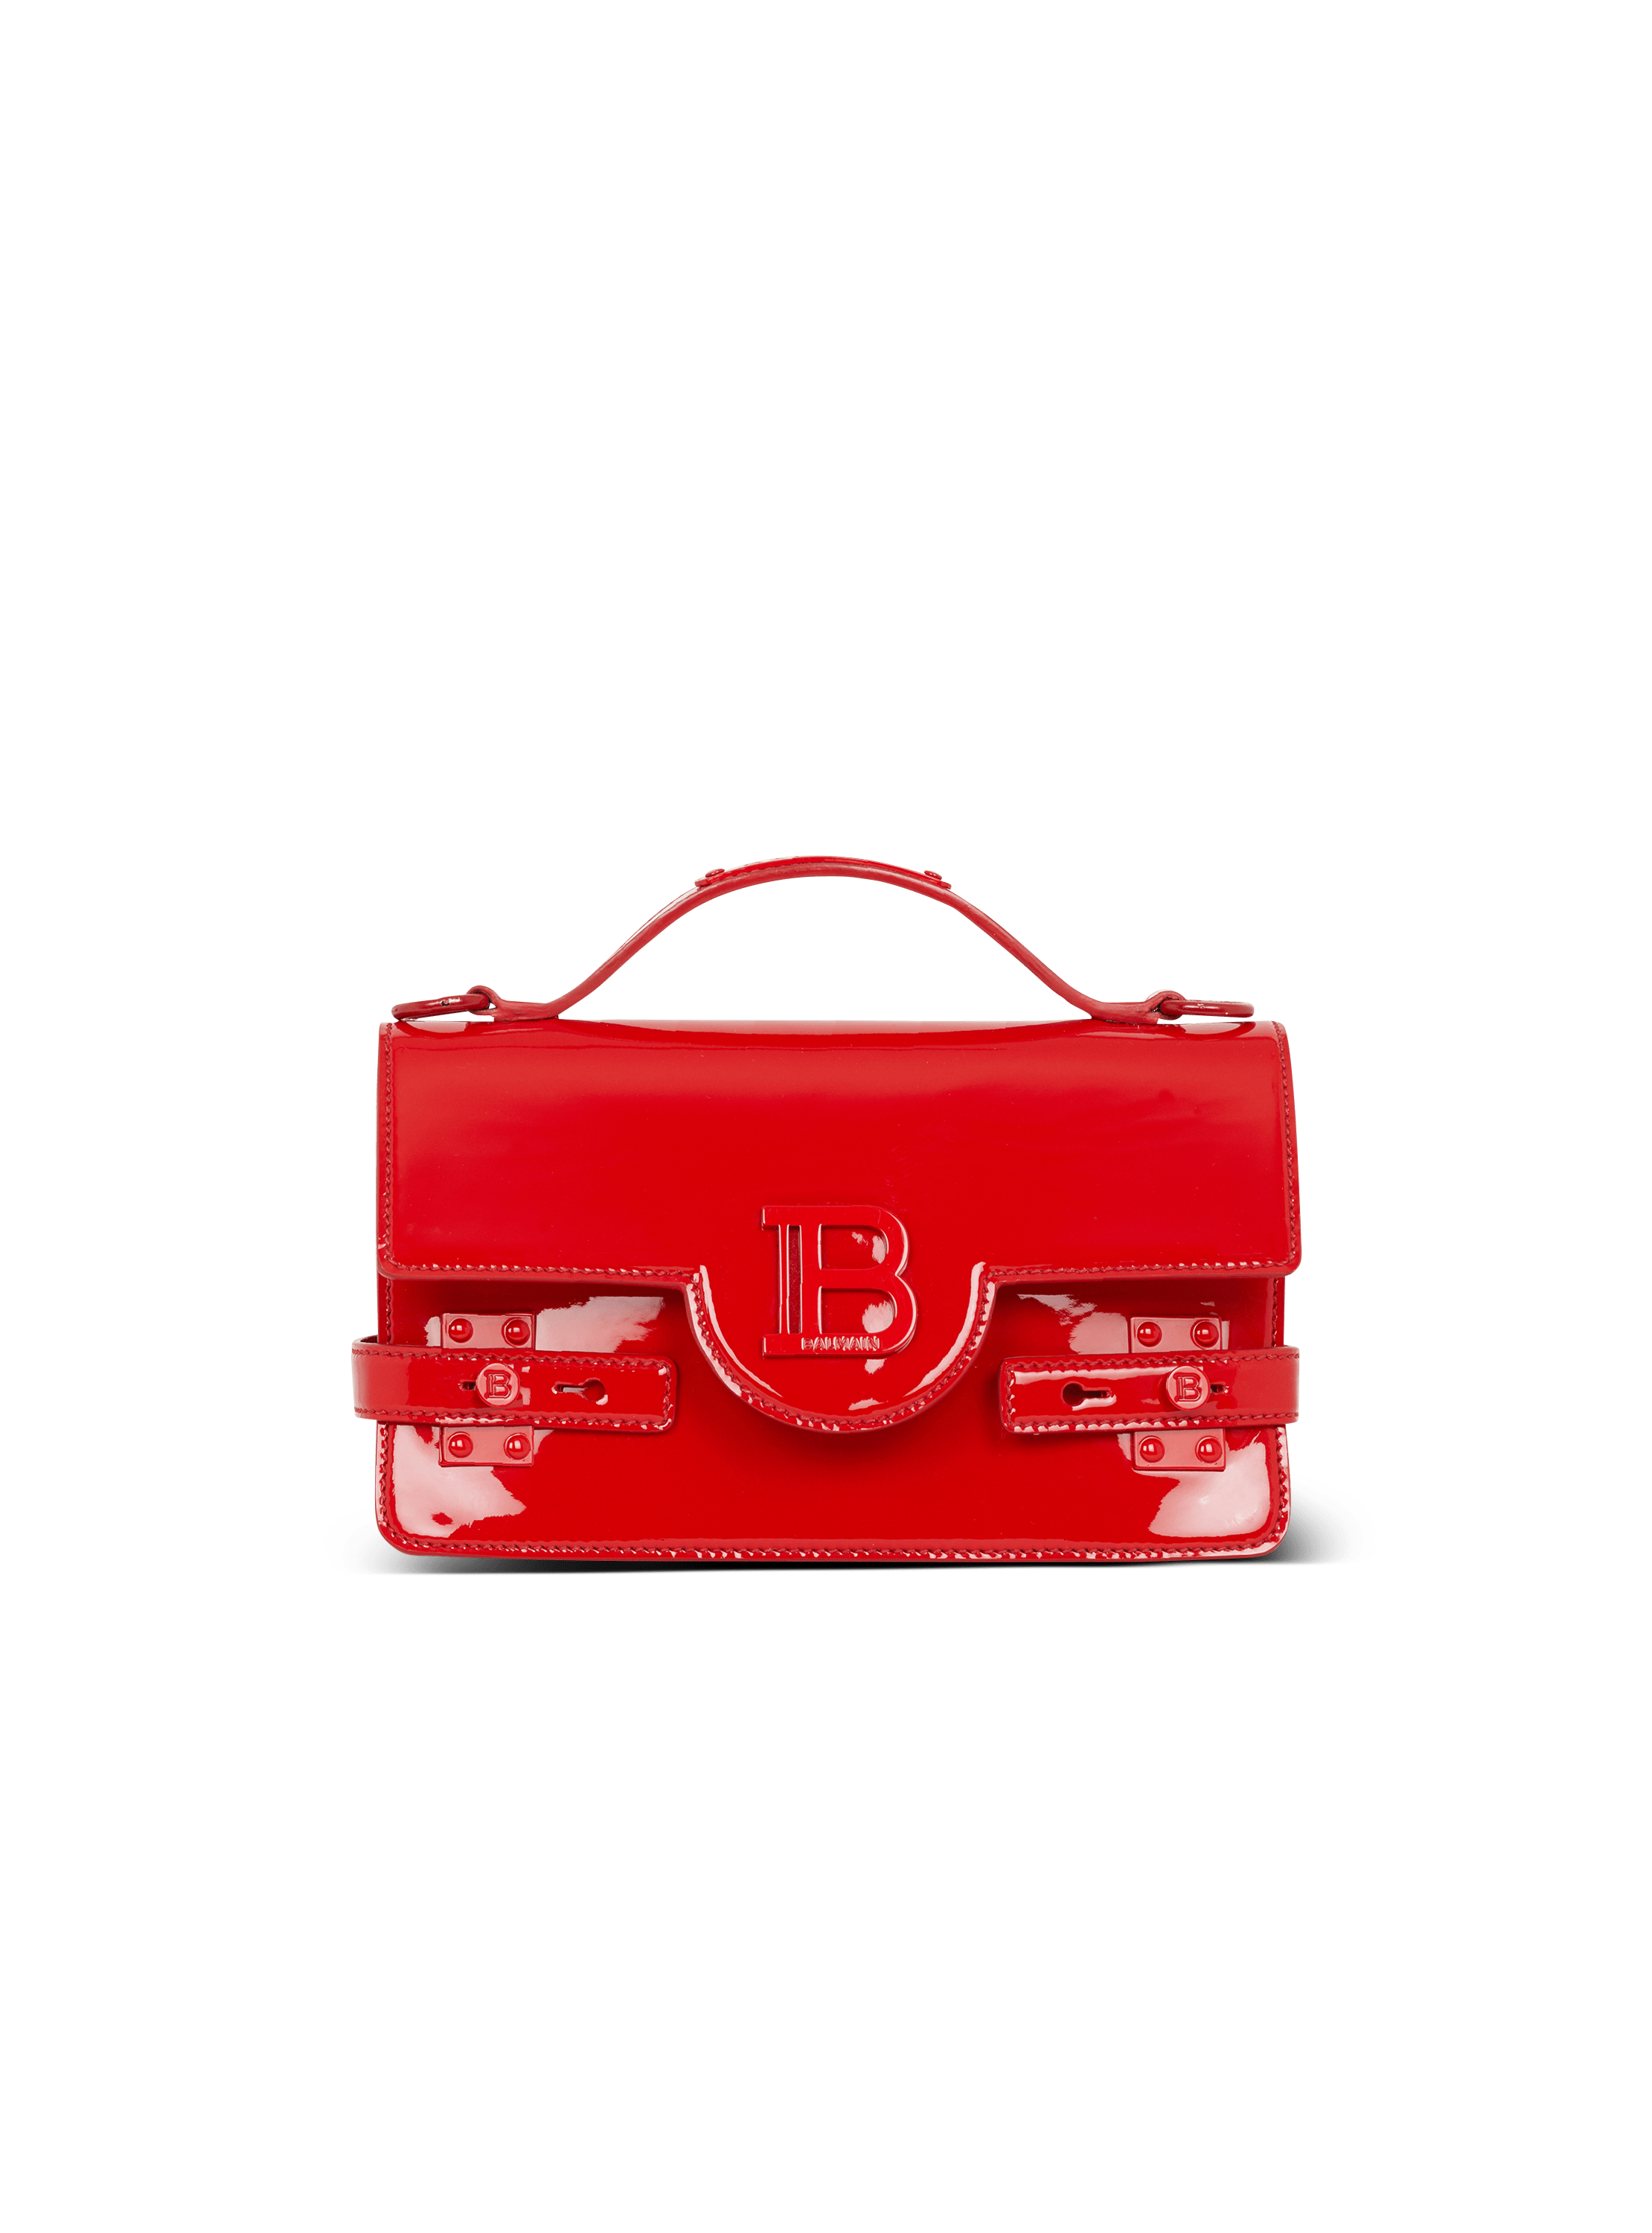 Black Label Bag Lacquered Edge Leather Strap (Red/Black)